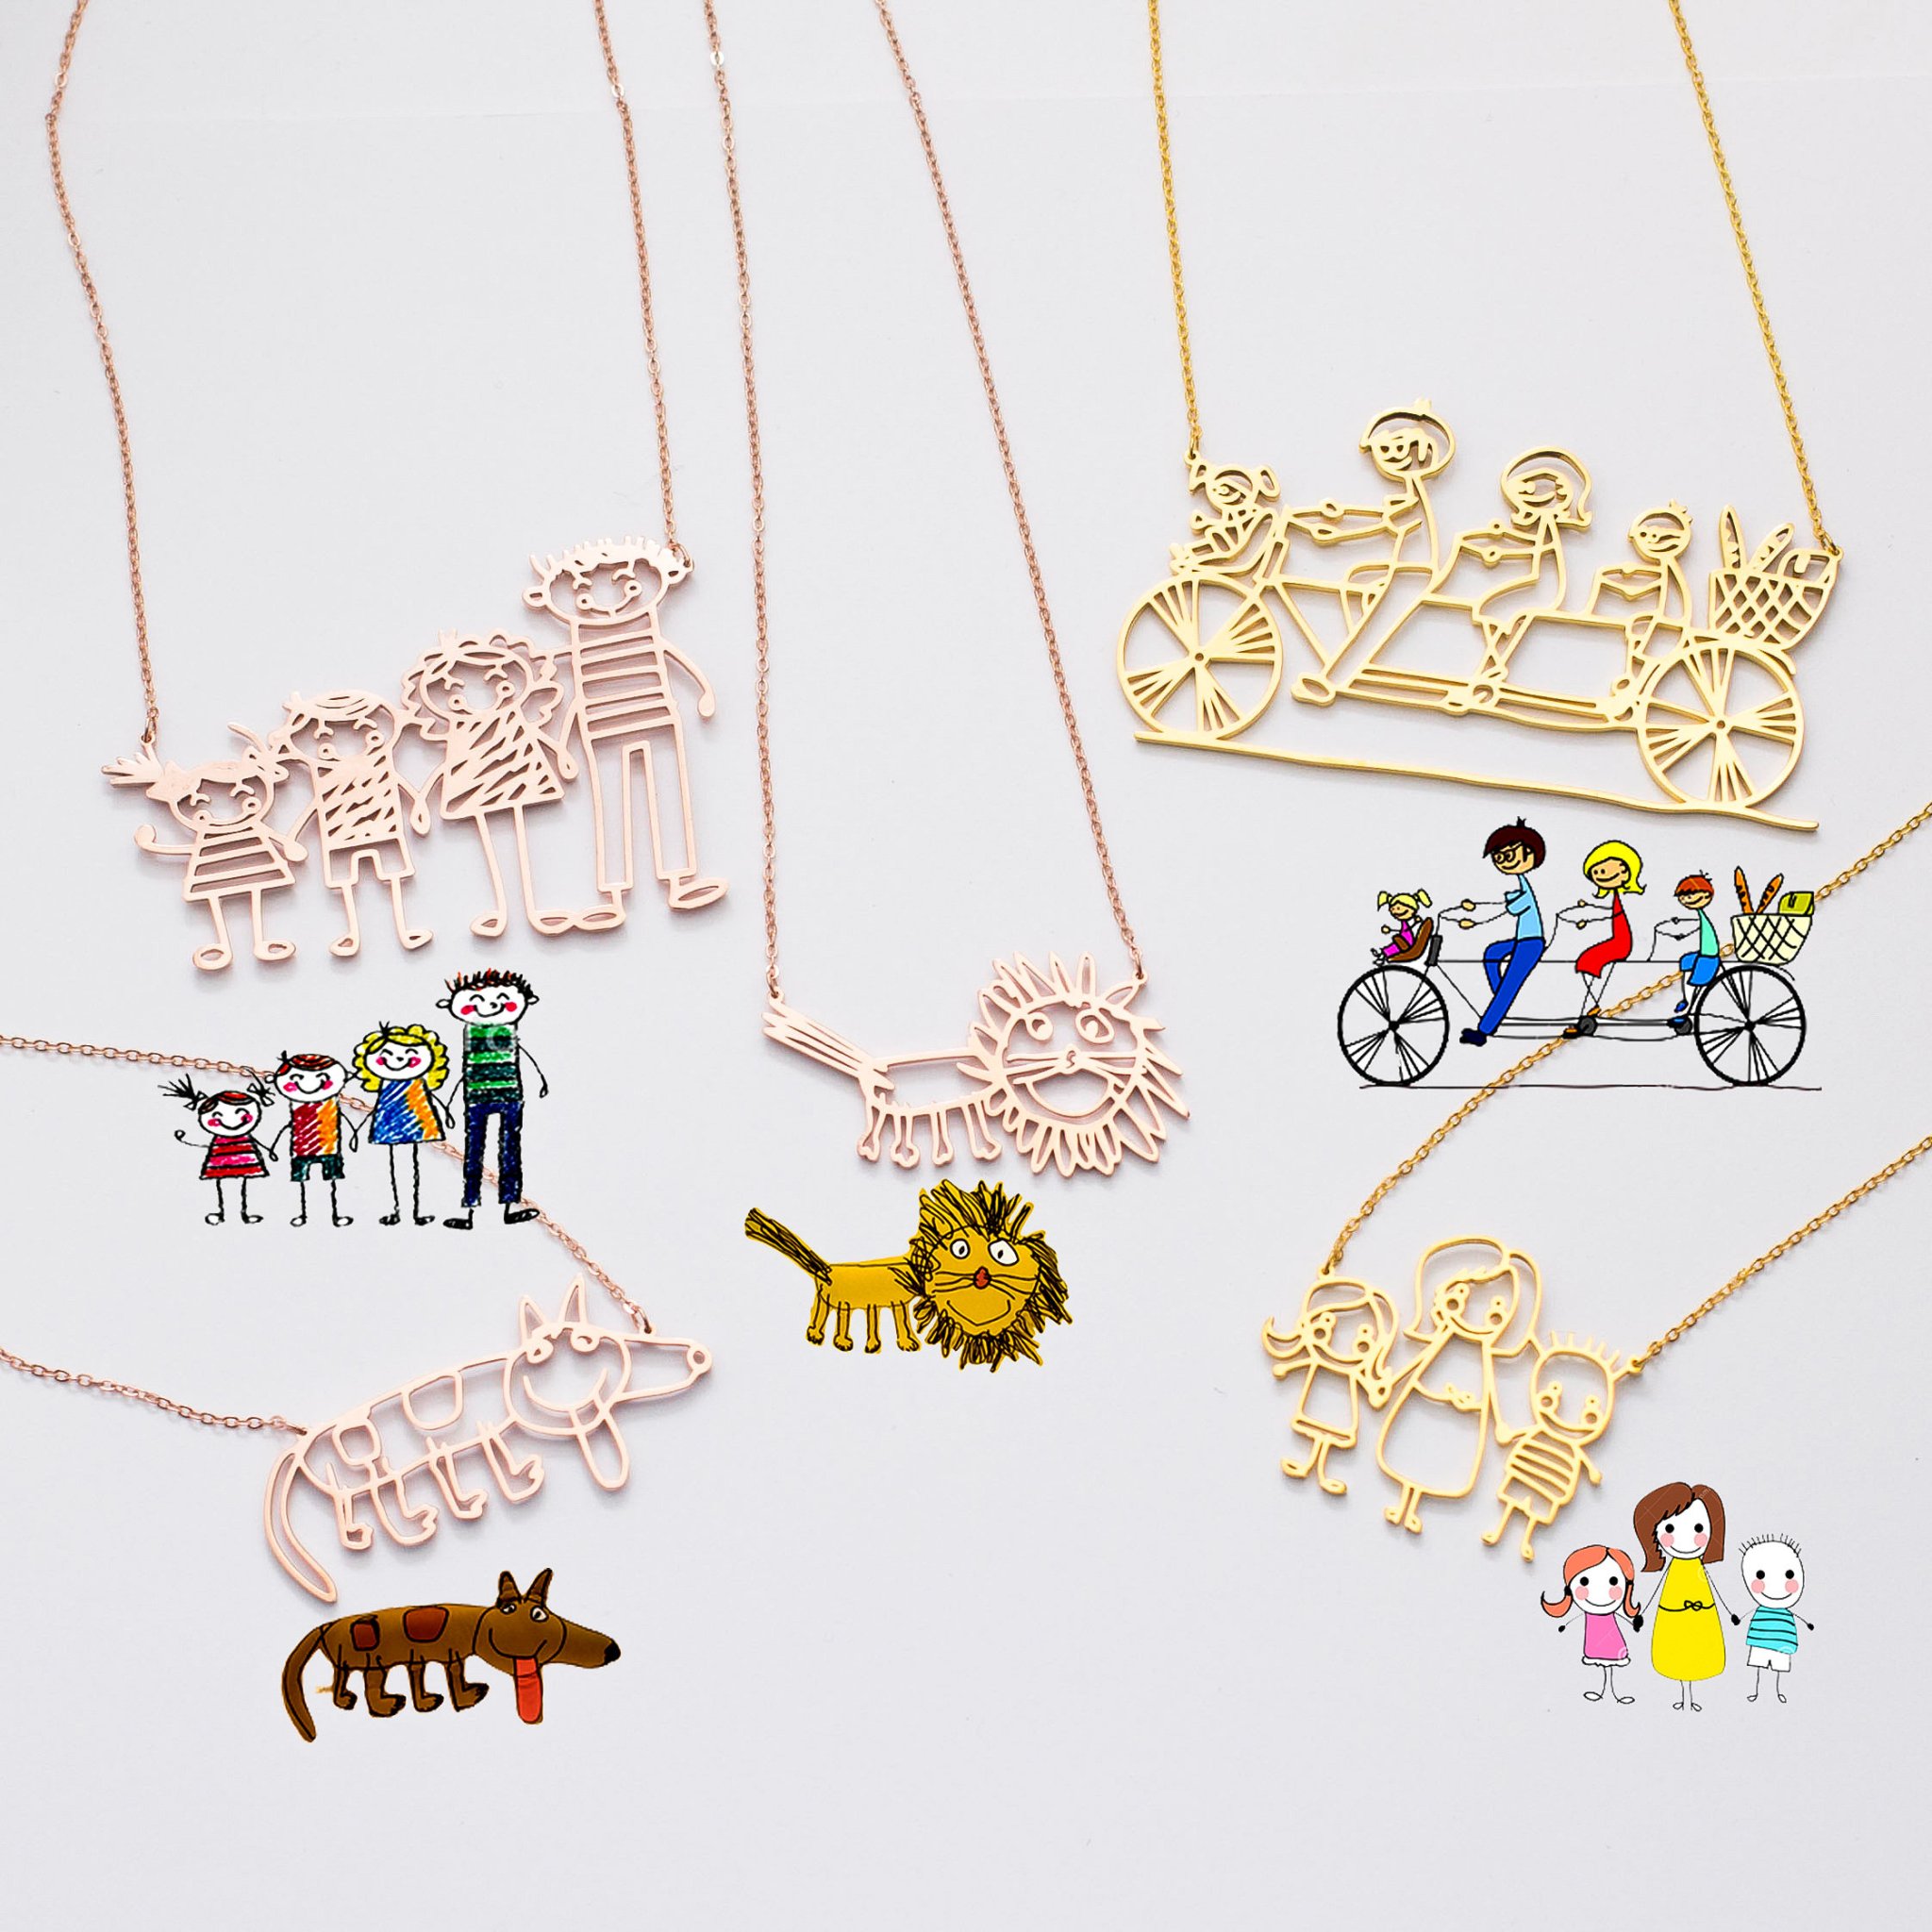 Necklace designed from children's drawings